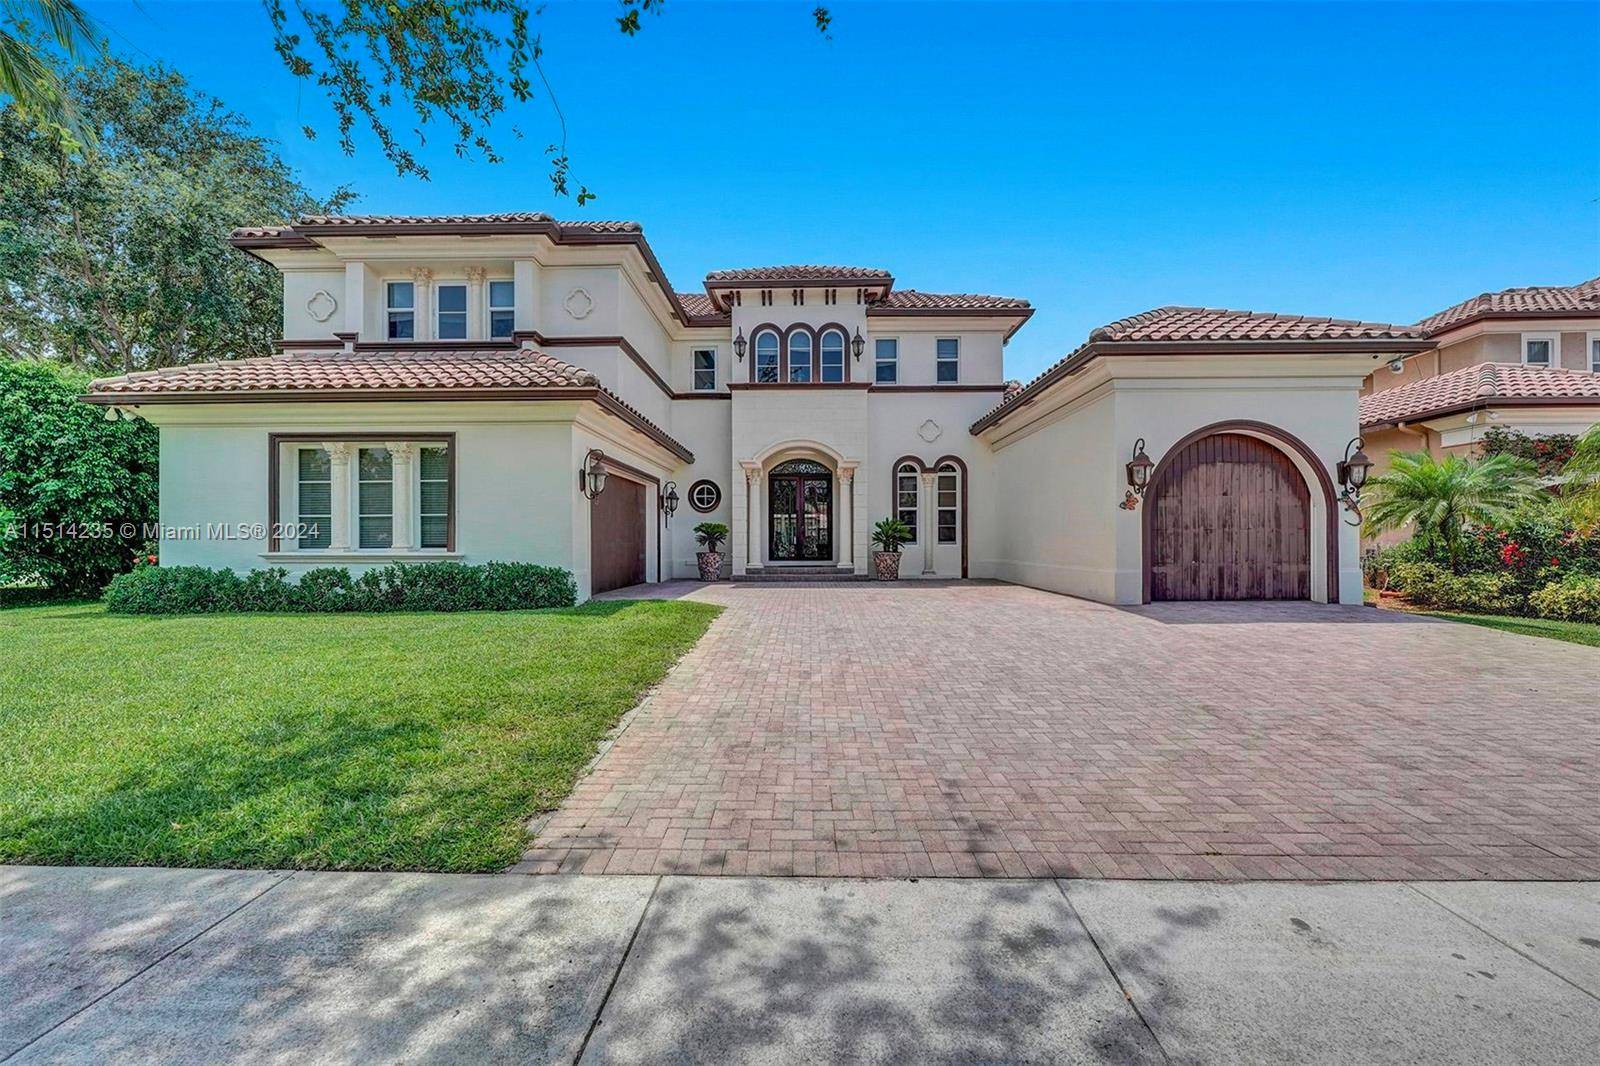 Impeccable House in the most Desired community in Boca Raton.